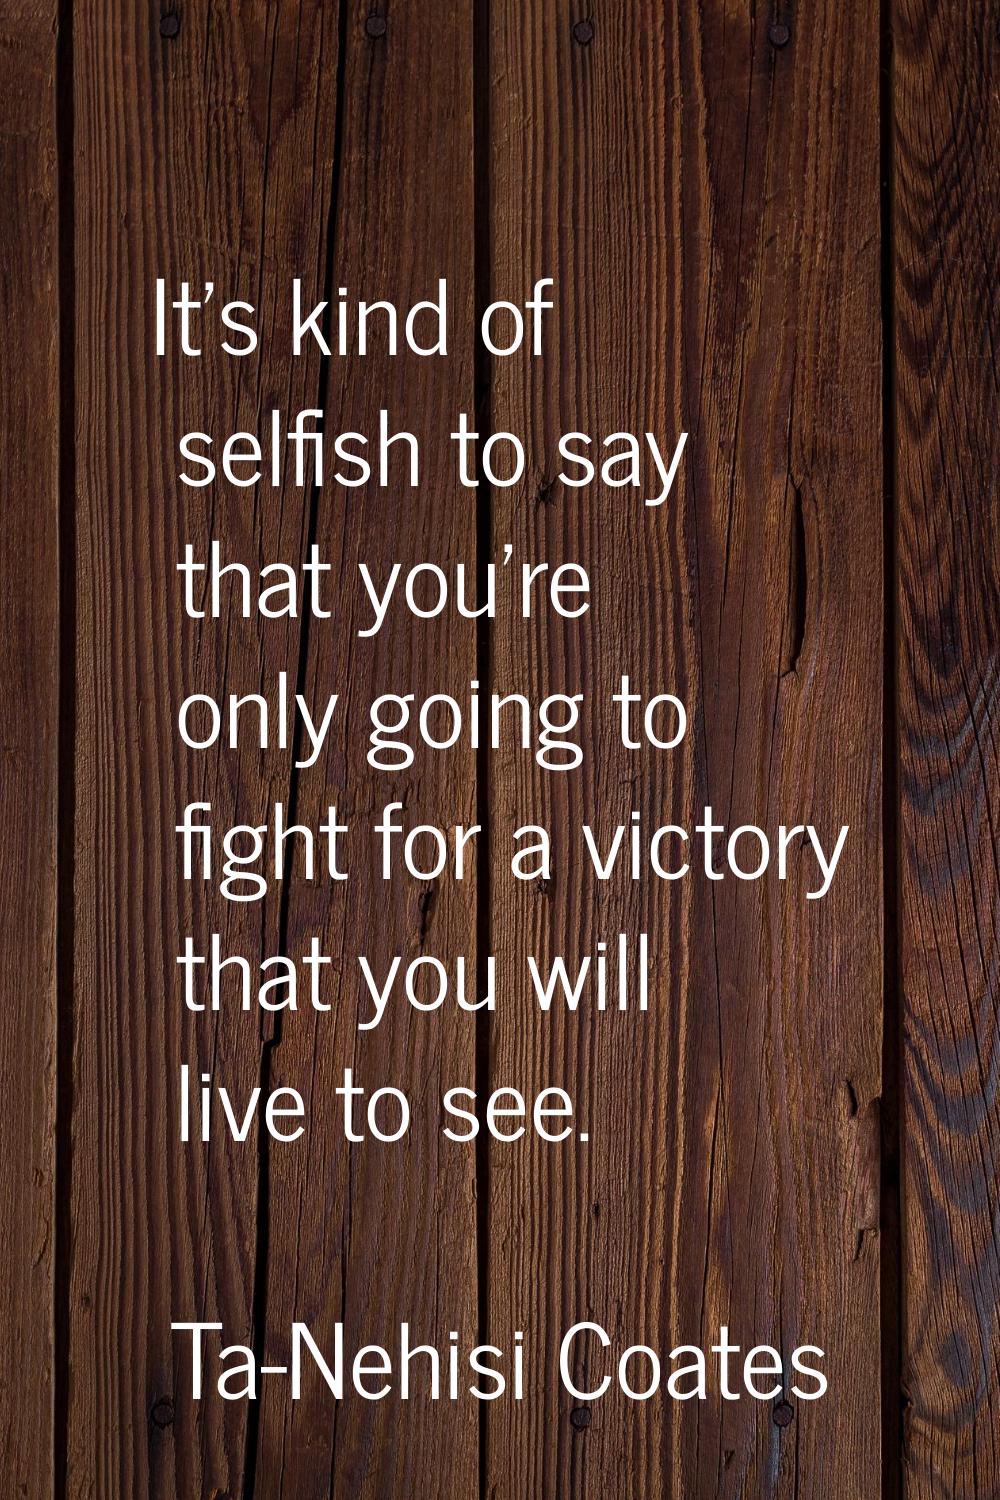 It's kind of selfish to say that you're only going to fight for a victory that you will live to see